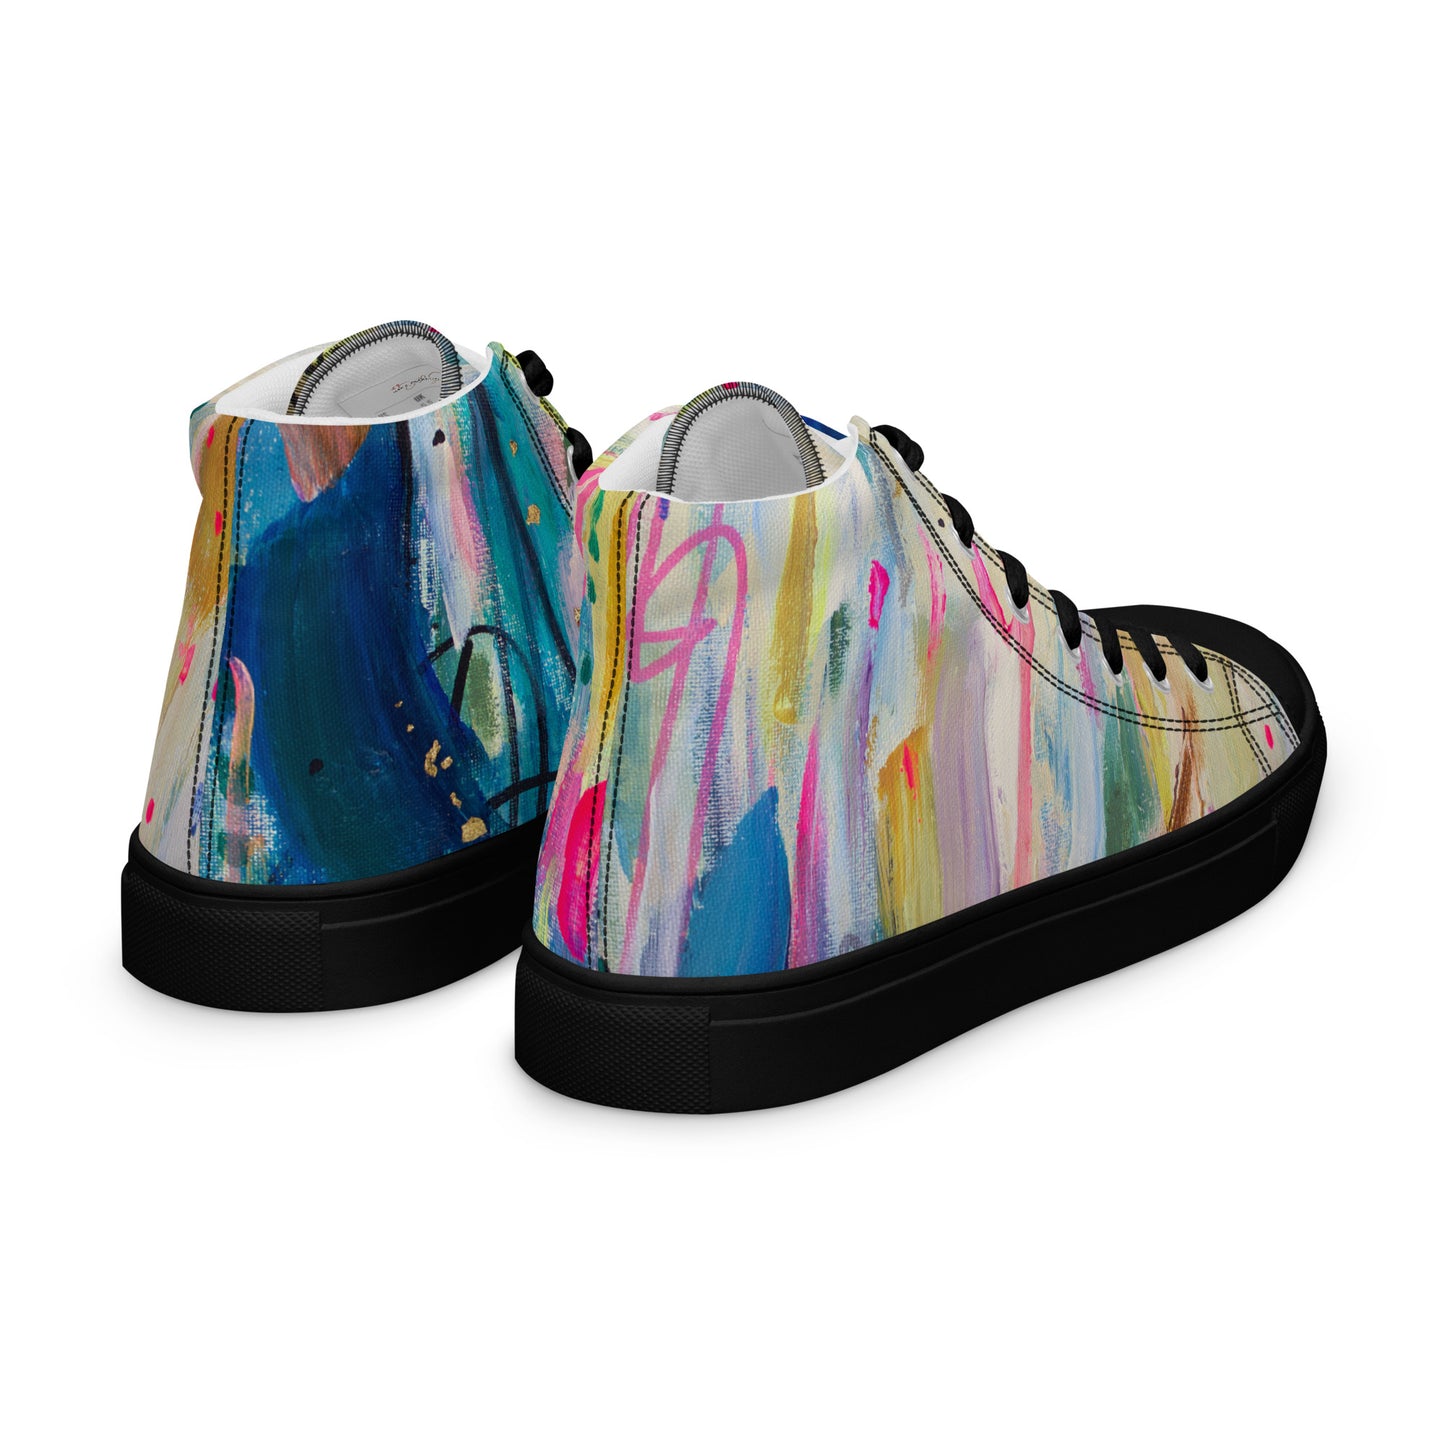 Sky Melt by Sara Franklin | Women’s high top canvas shoes